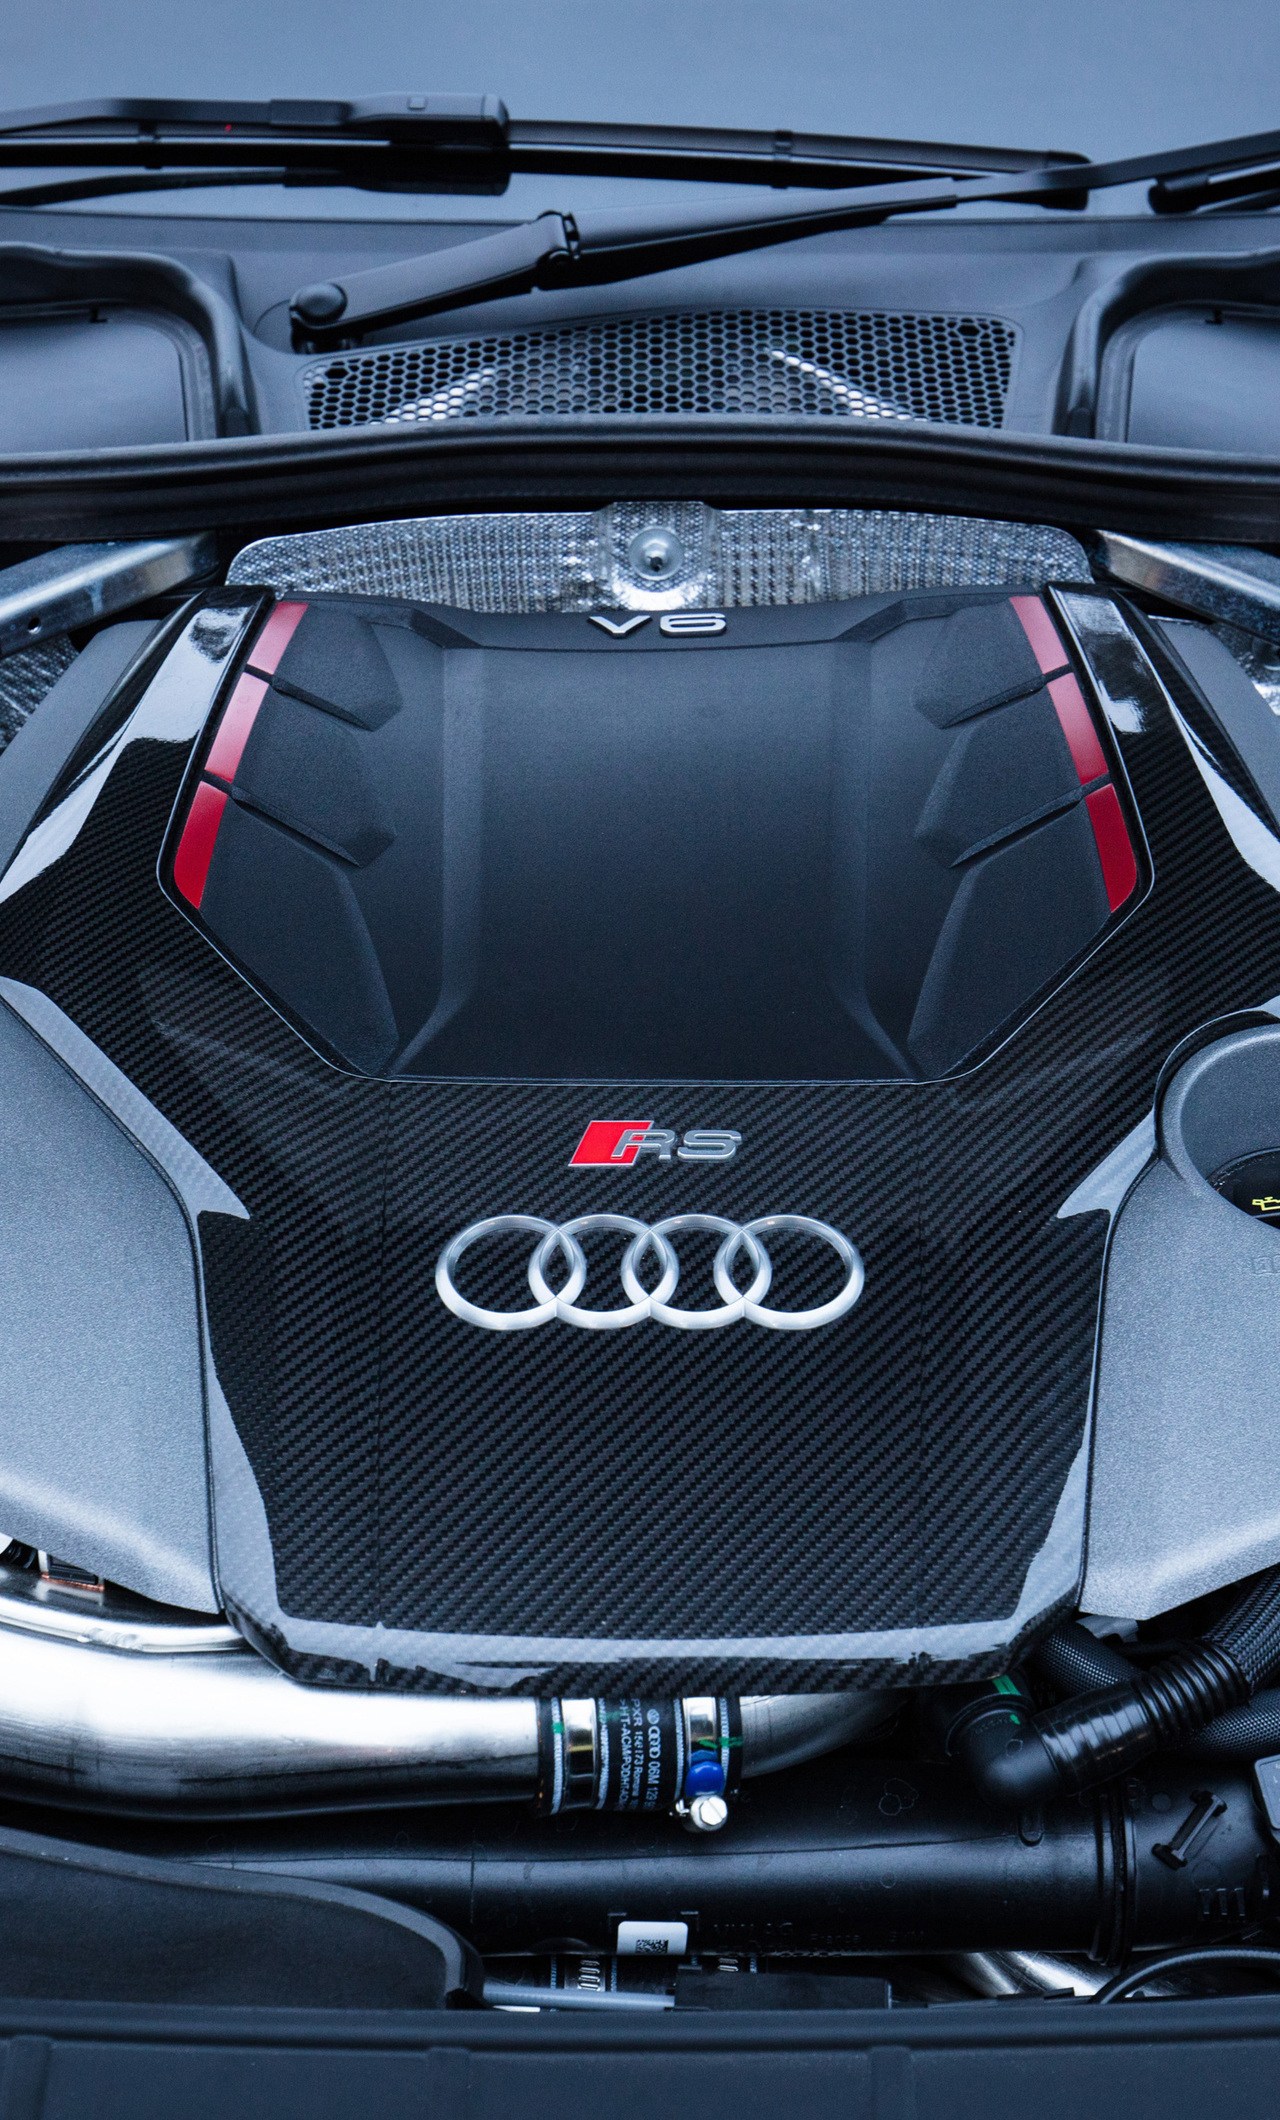 Audi Rs5 Engine Iphone 6 Hd 4k Wallpapers Images Wallpaper - 2018 Audi Rs5  Engine - 1280x2120 Wallpaper 